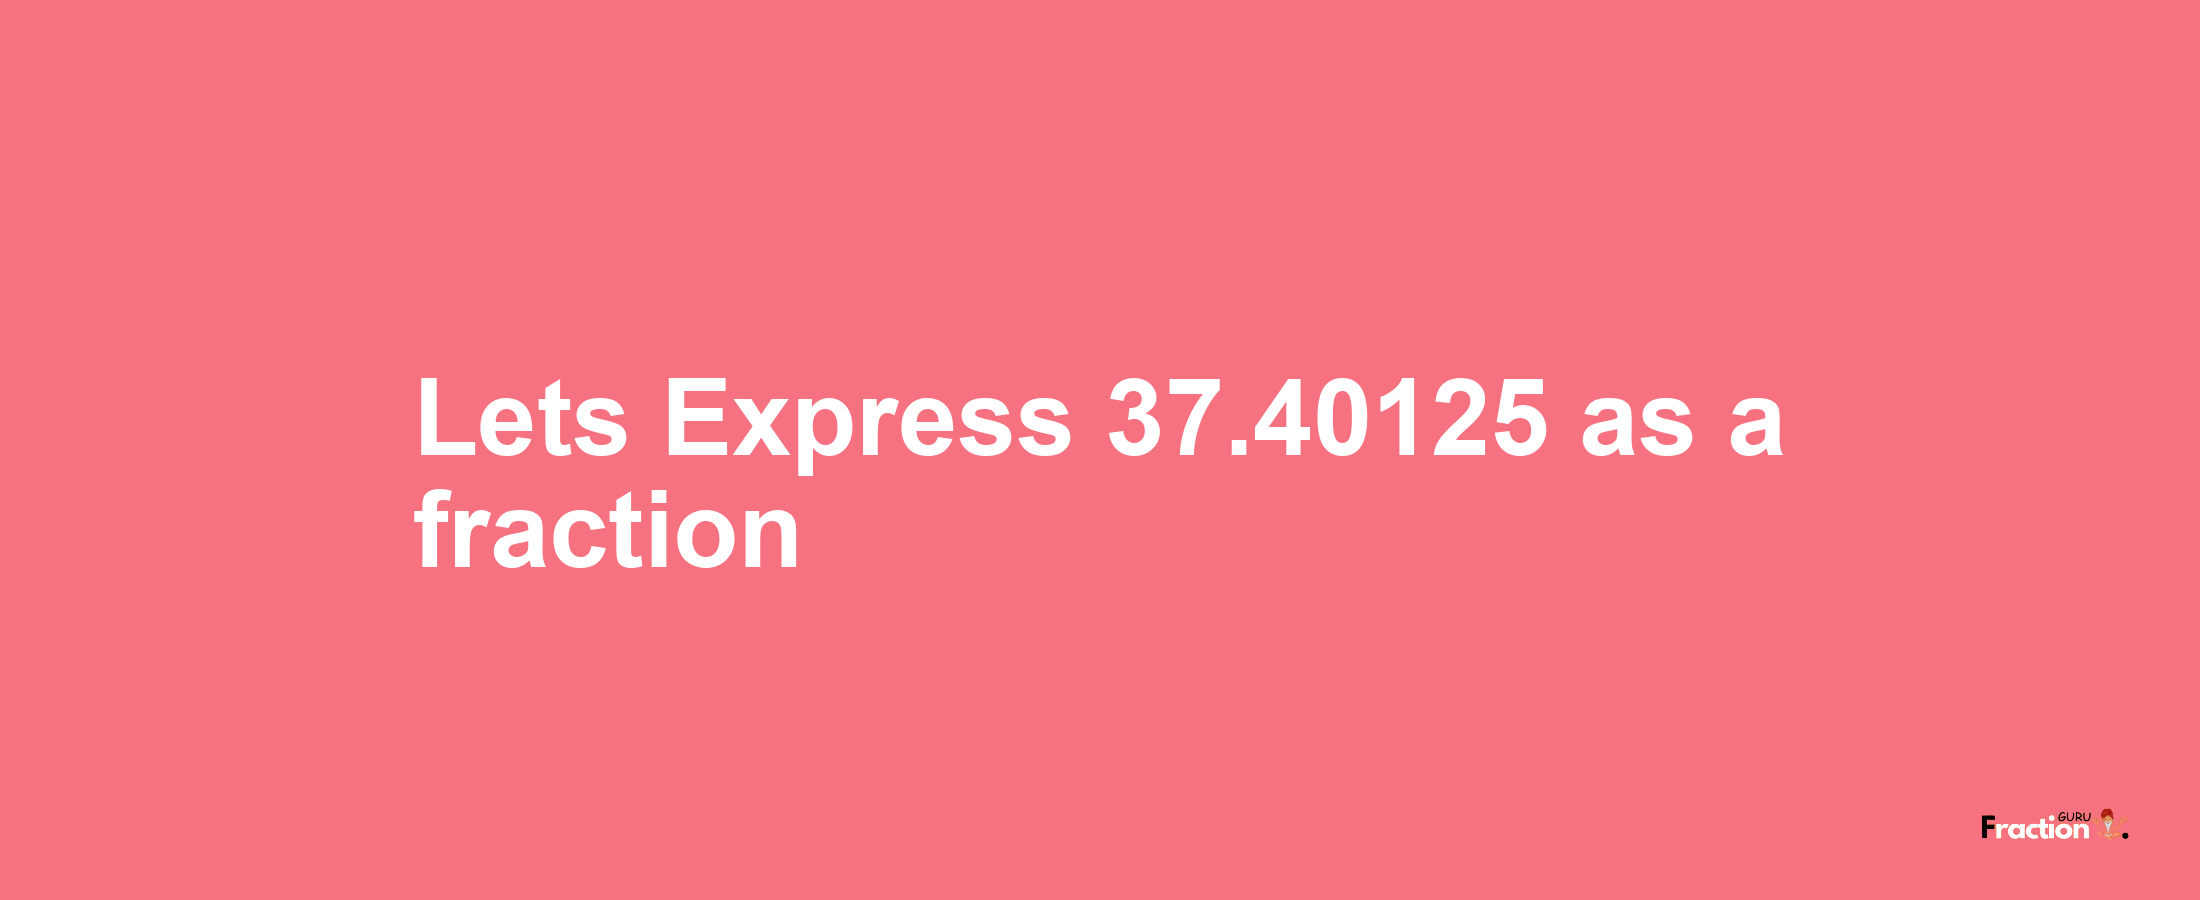 Lets Express 37.40125 as afraction